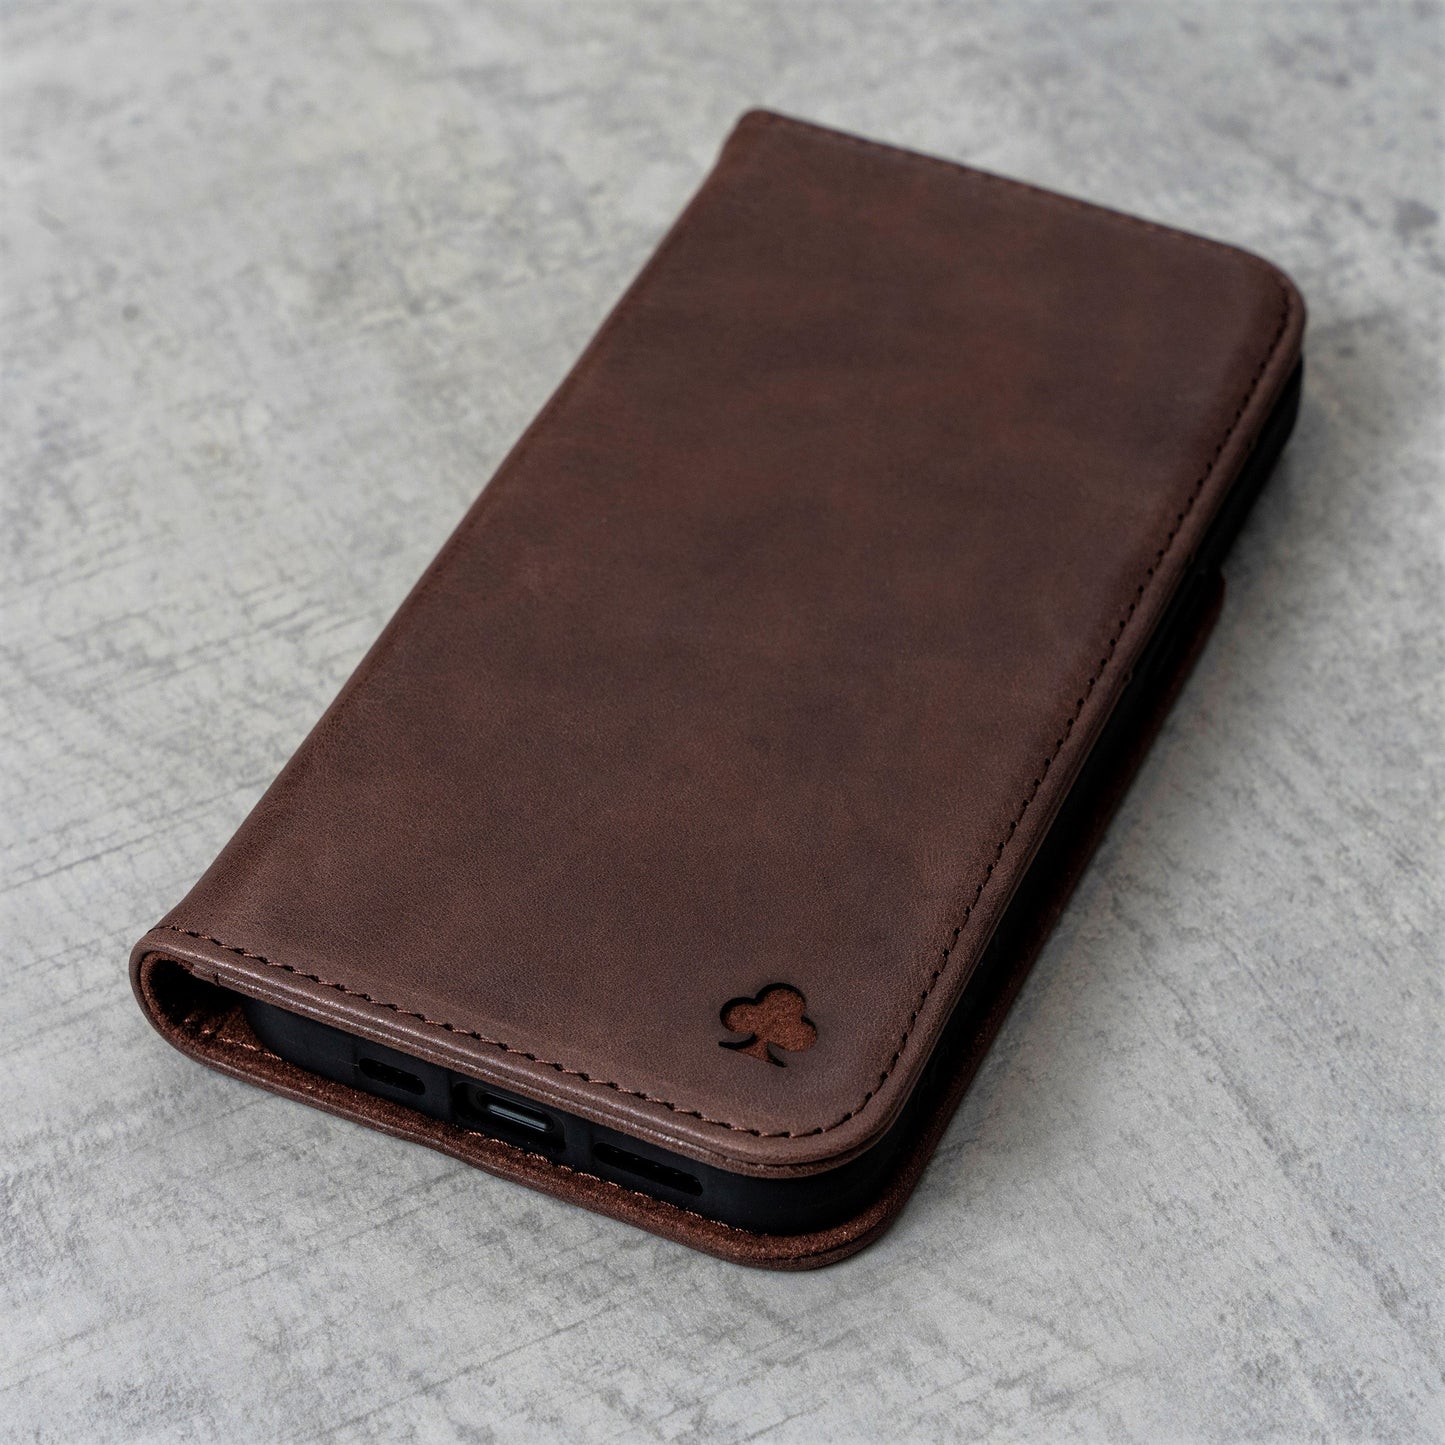 Samsung Galaxy S22 Leather Case. Premium Slim Genuine Leather Stand Case/Cover/Wallet (Chocolate Brown)